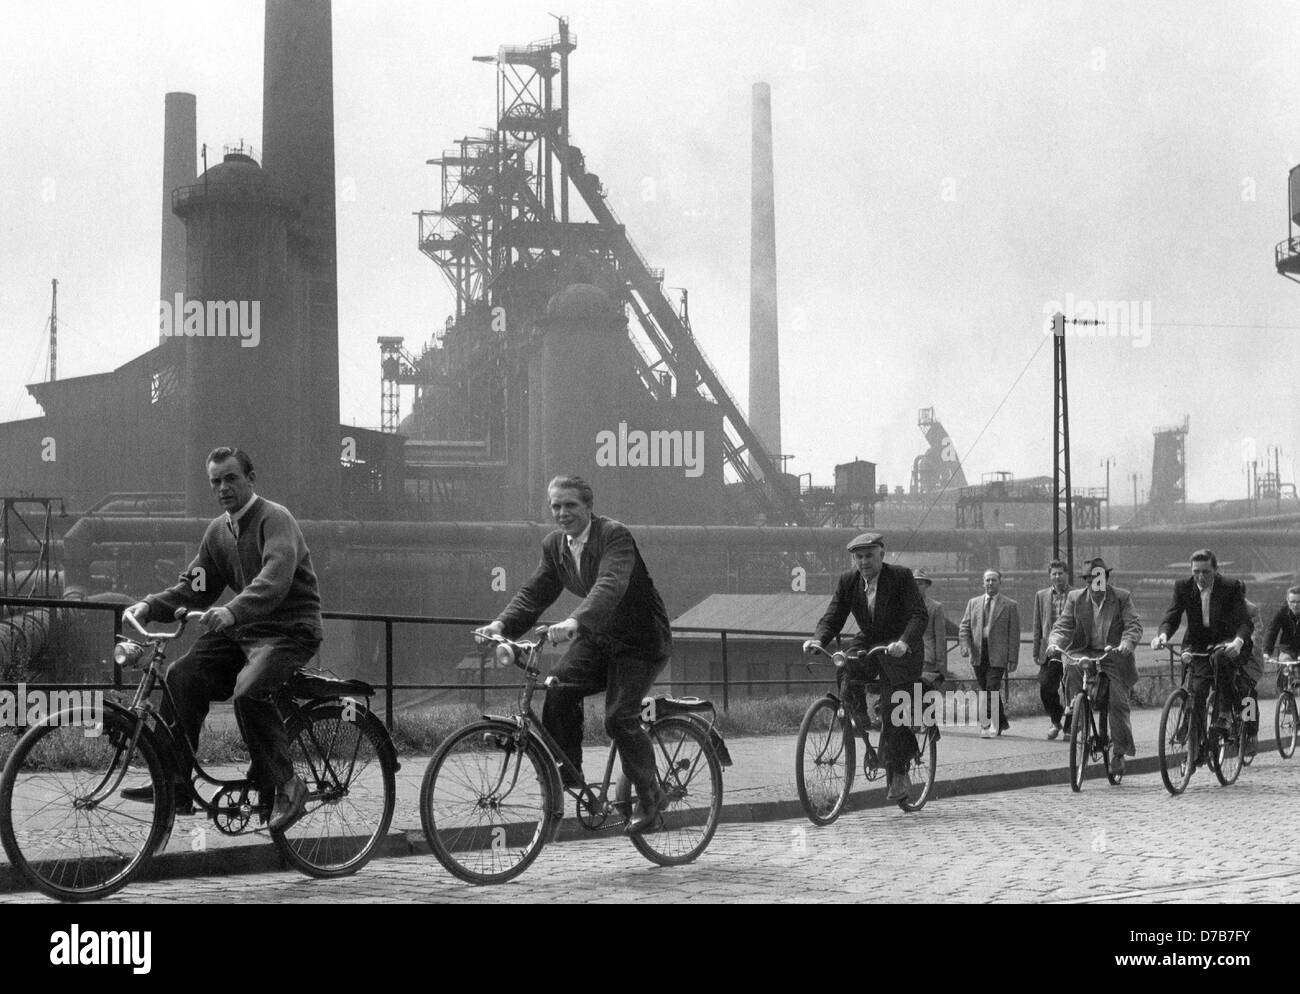 Workers on their bicycles during change of shift at the smelting works Oberhausen in 1957. Stock Photo